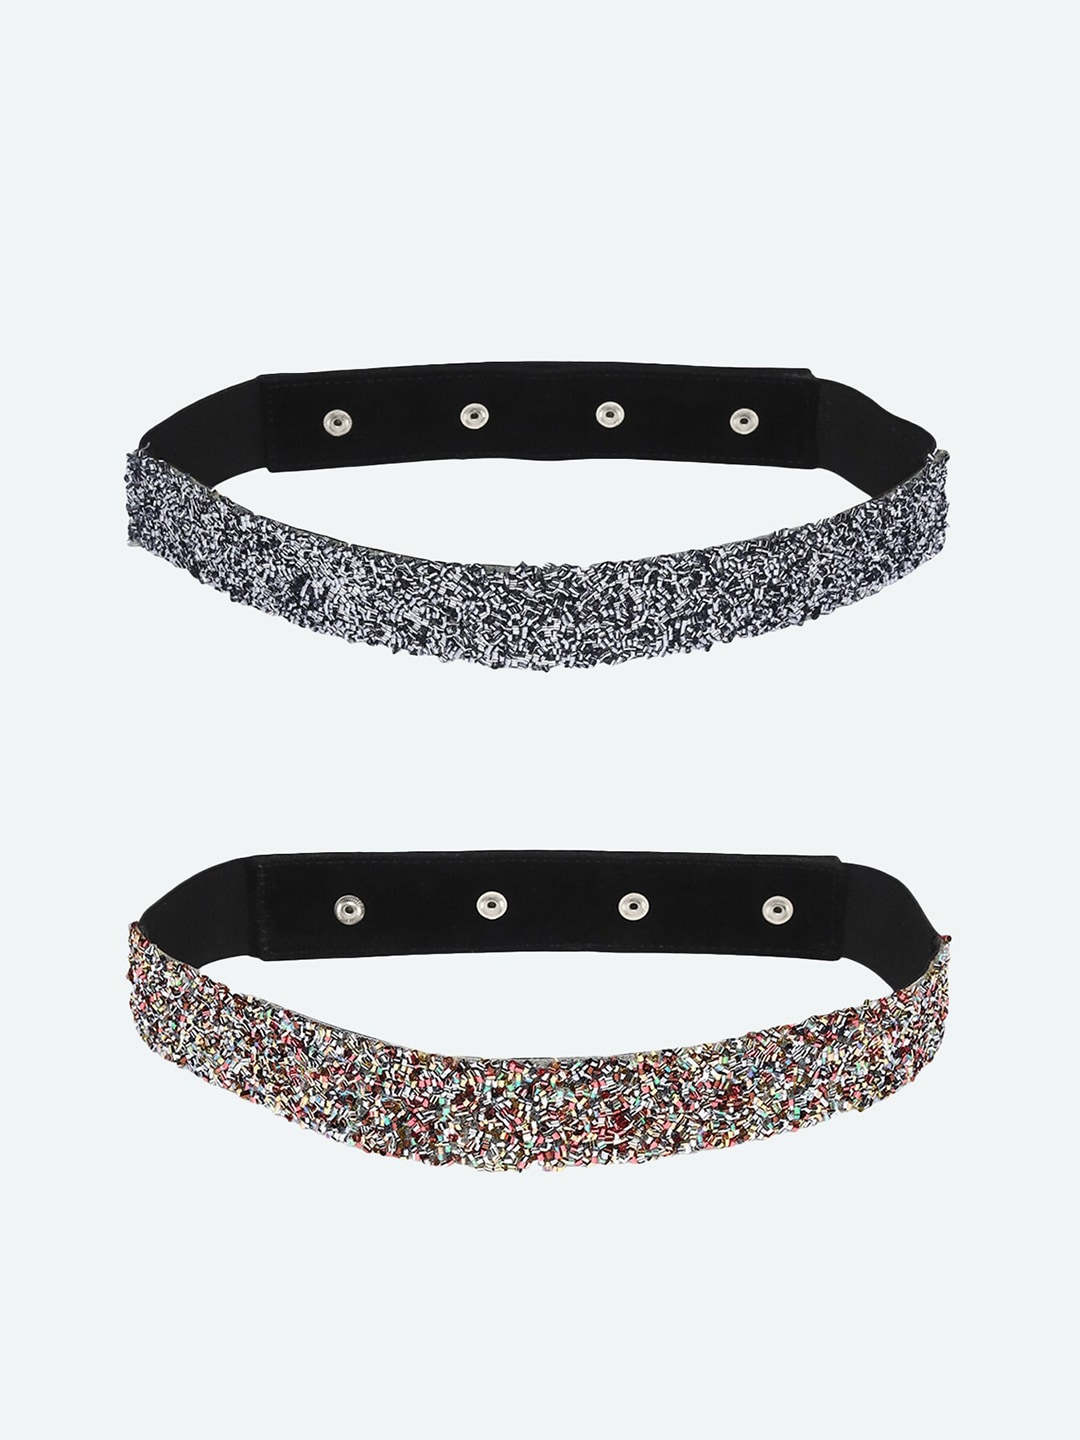 DEEBACO Women Set of 2 Silver-Toned & Gold-Toned Embellished Belts Price in India